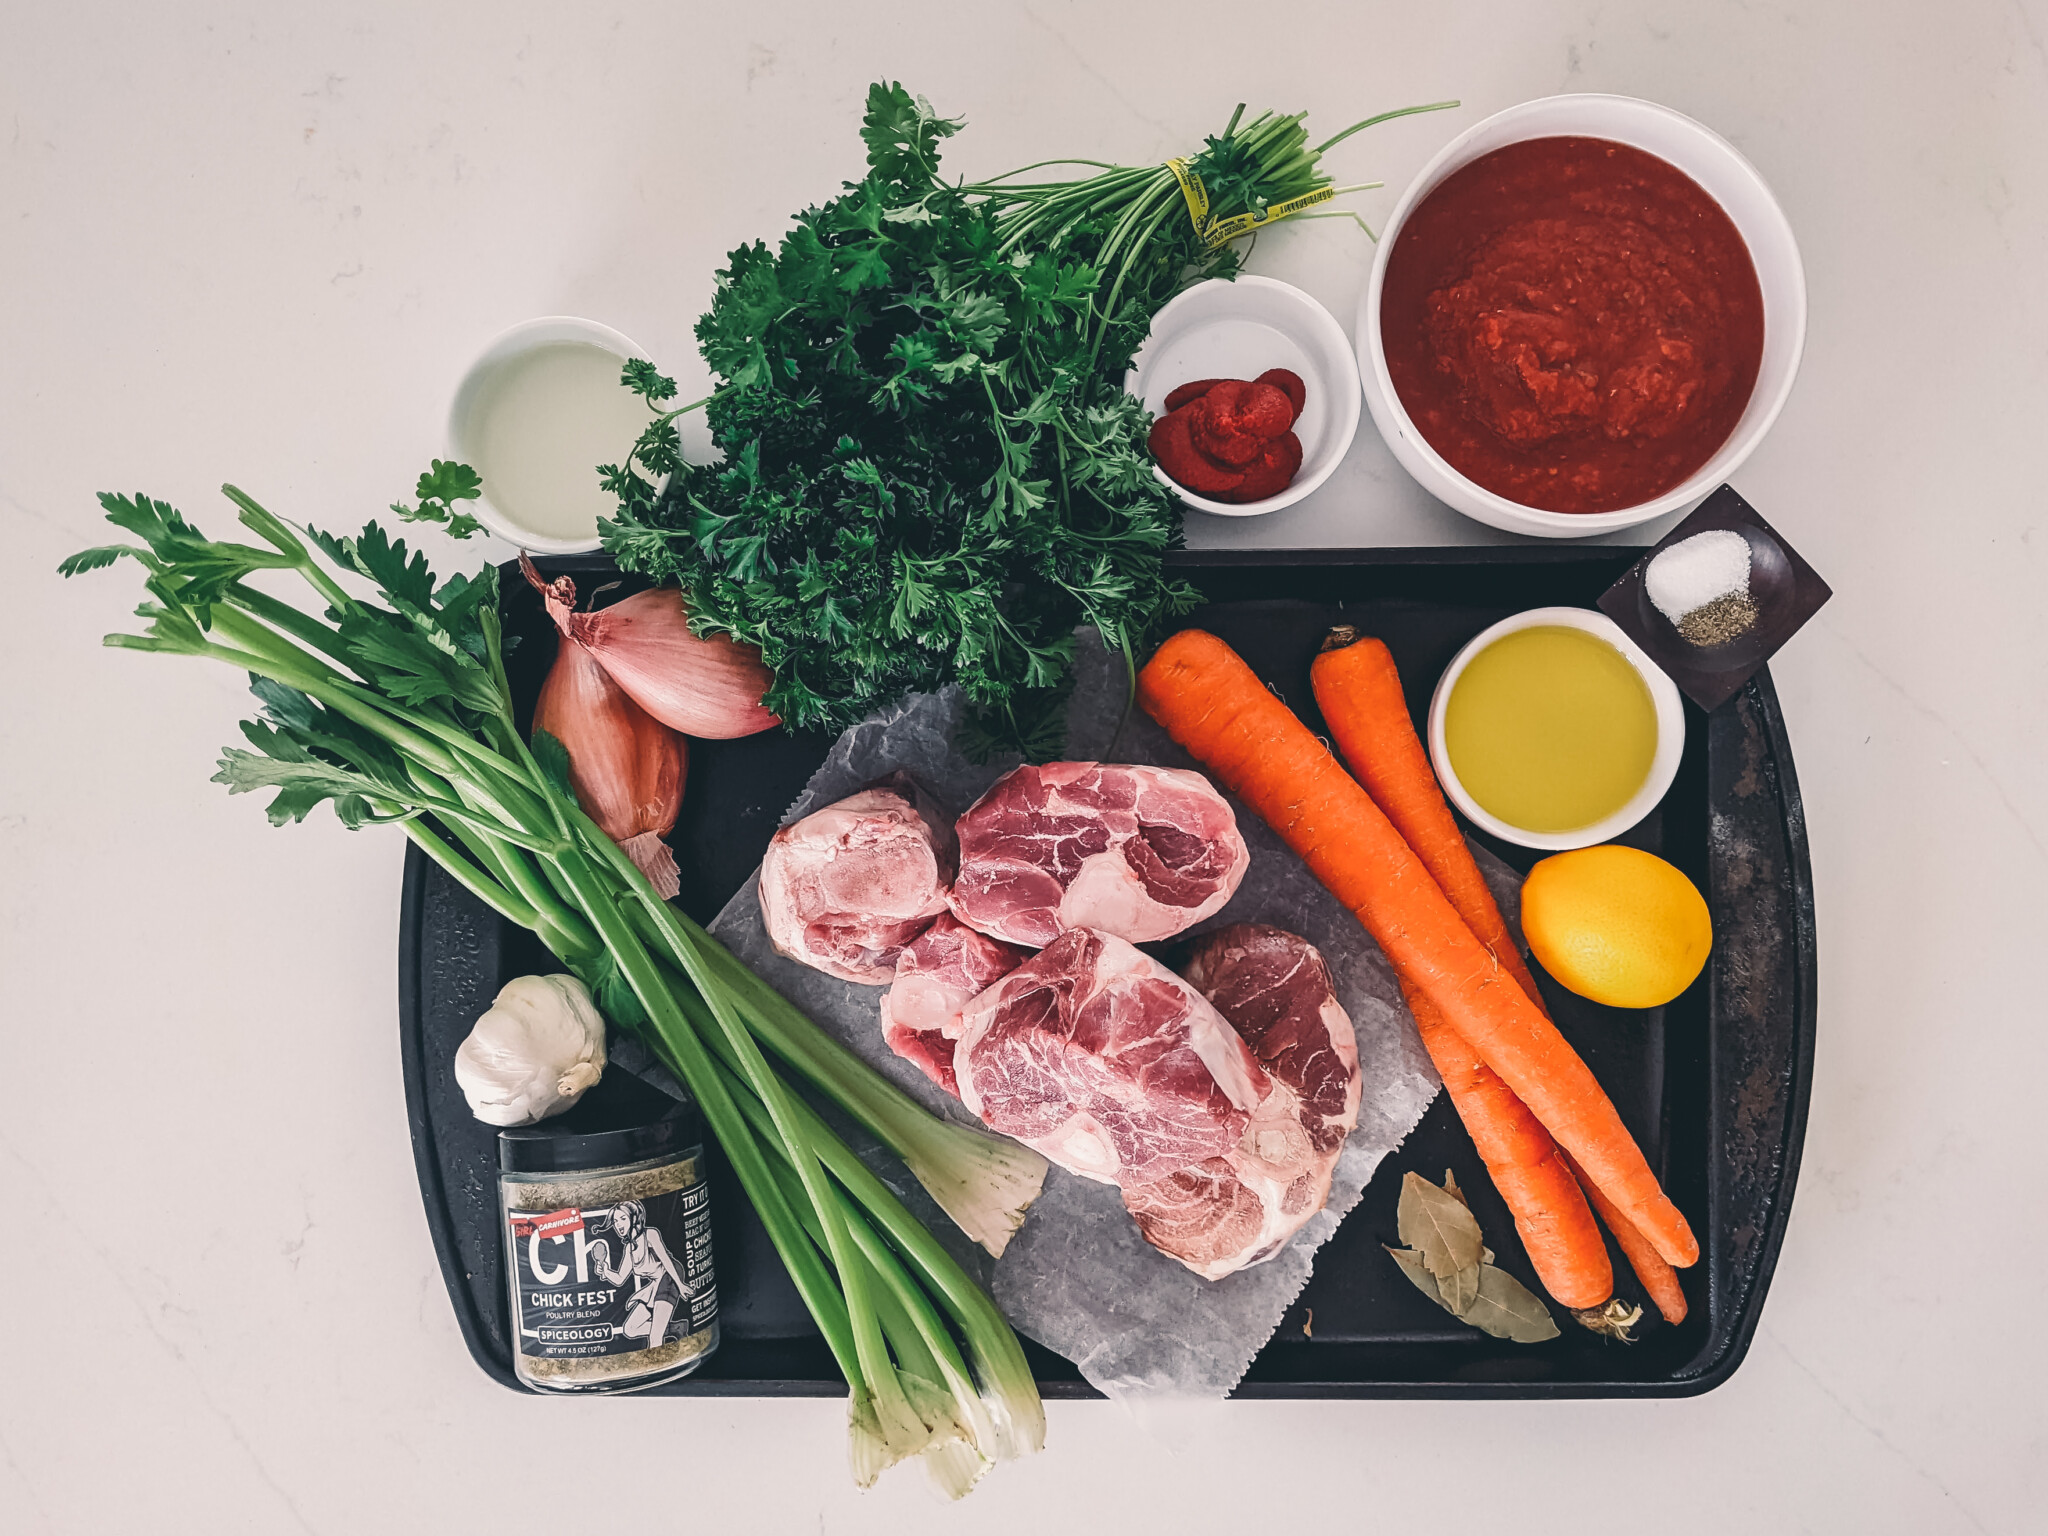 Ingredients needed for sous vide osso buco; pork shanks, carrots, celery, onion, spices, garlic, crushed tomatoes, shallots, wine, parsley, lemon salt and pepper